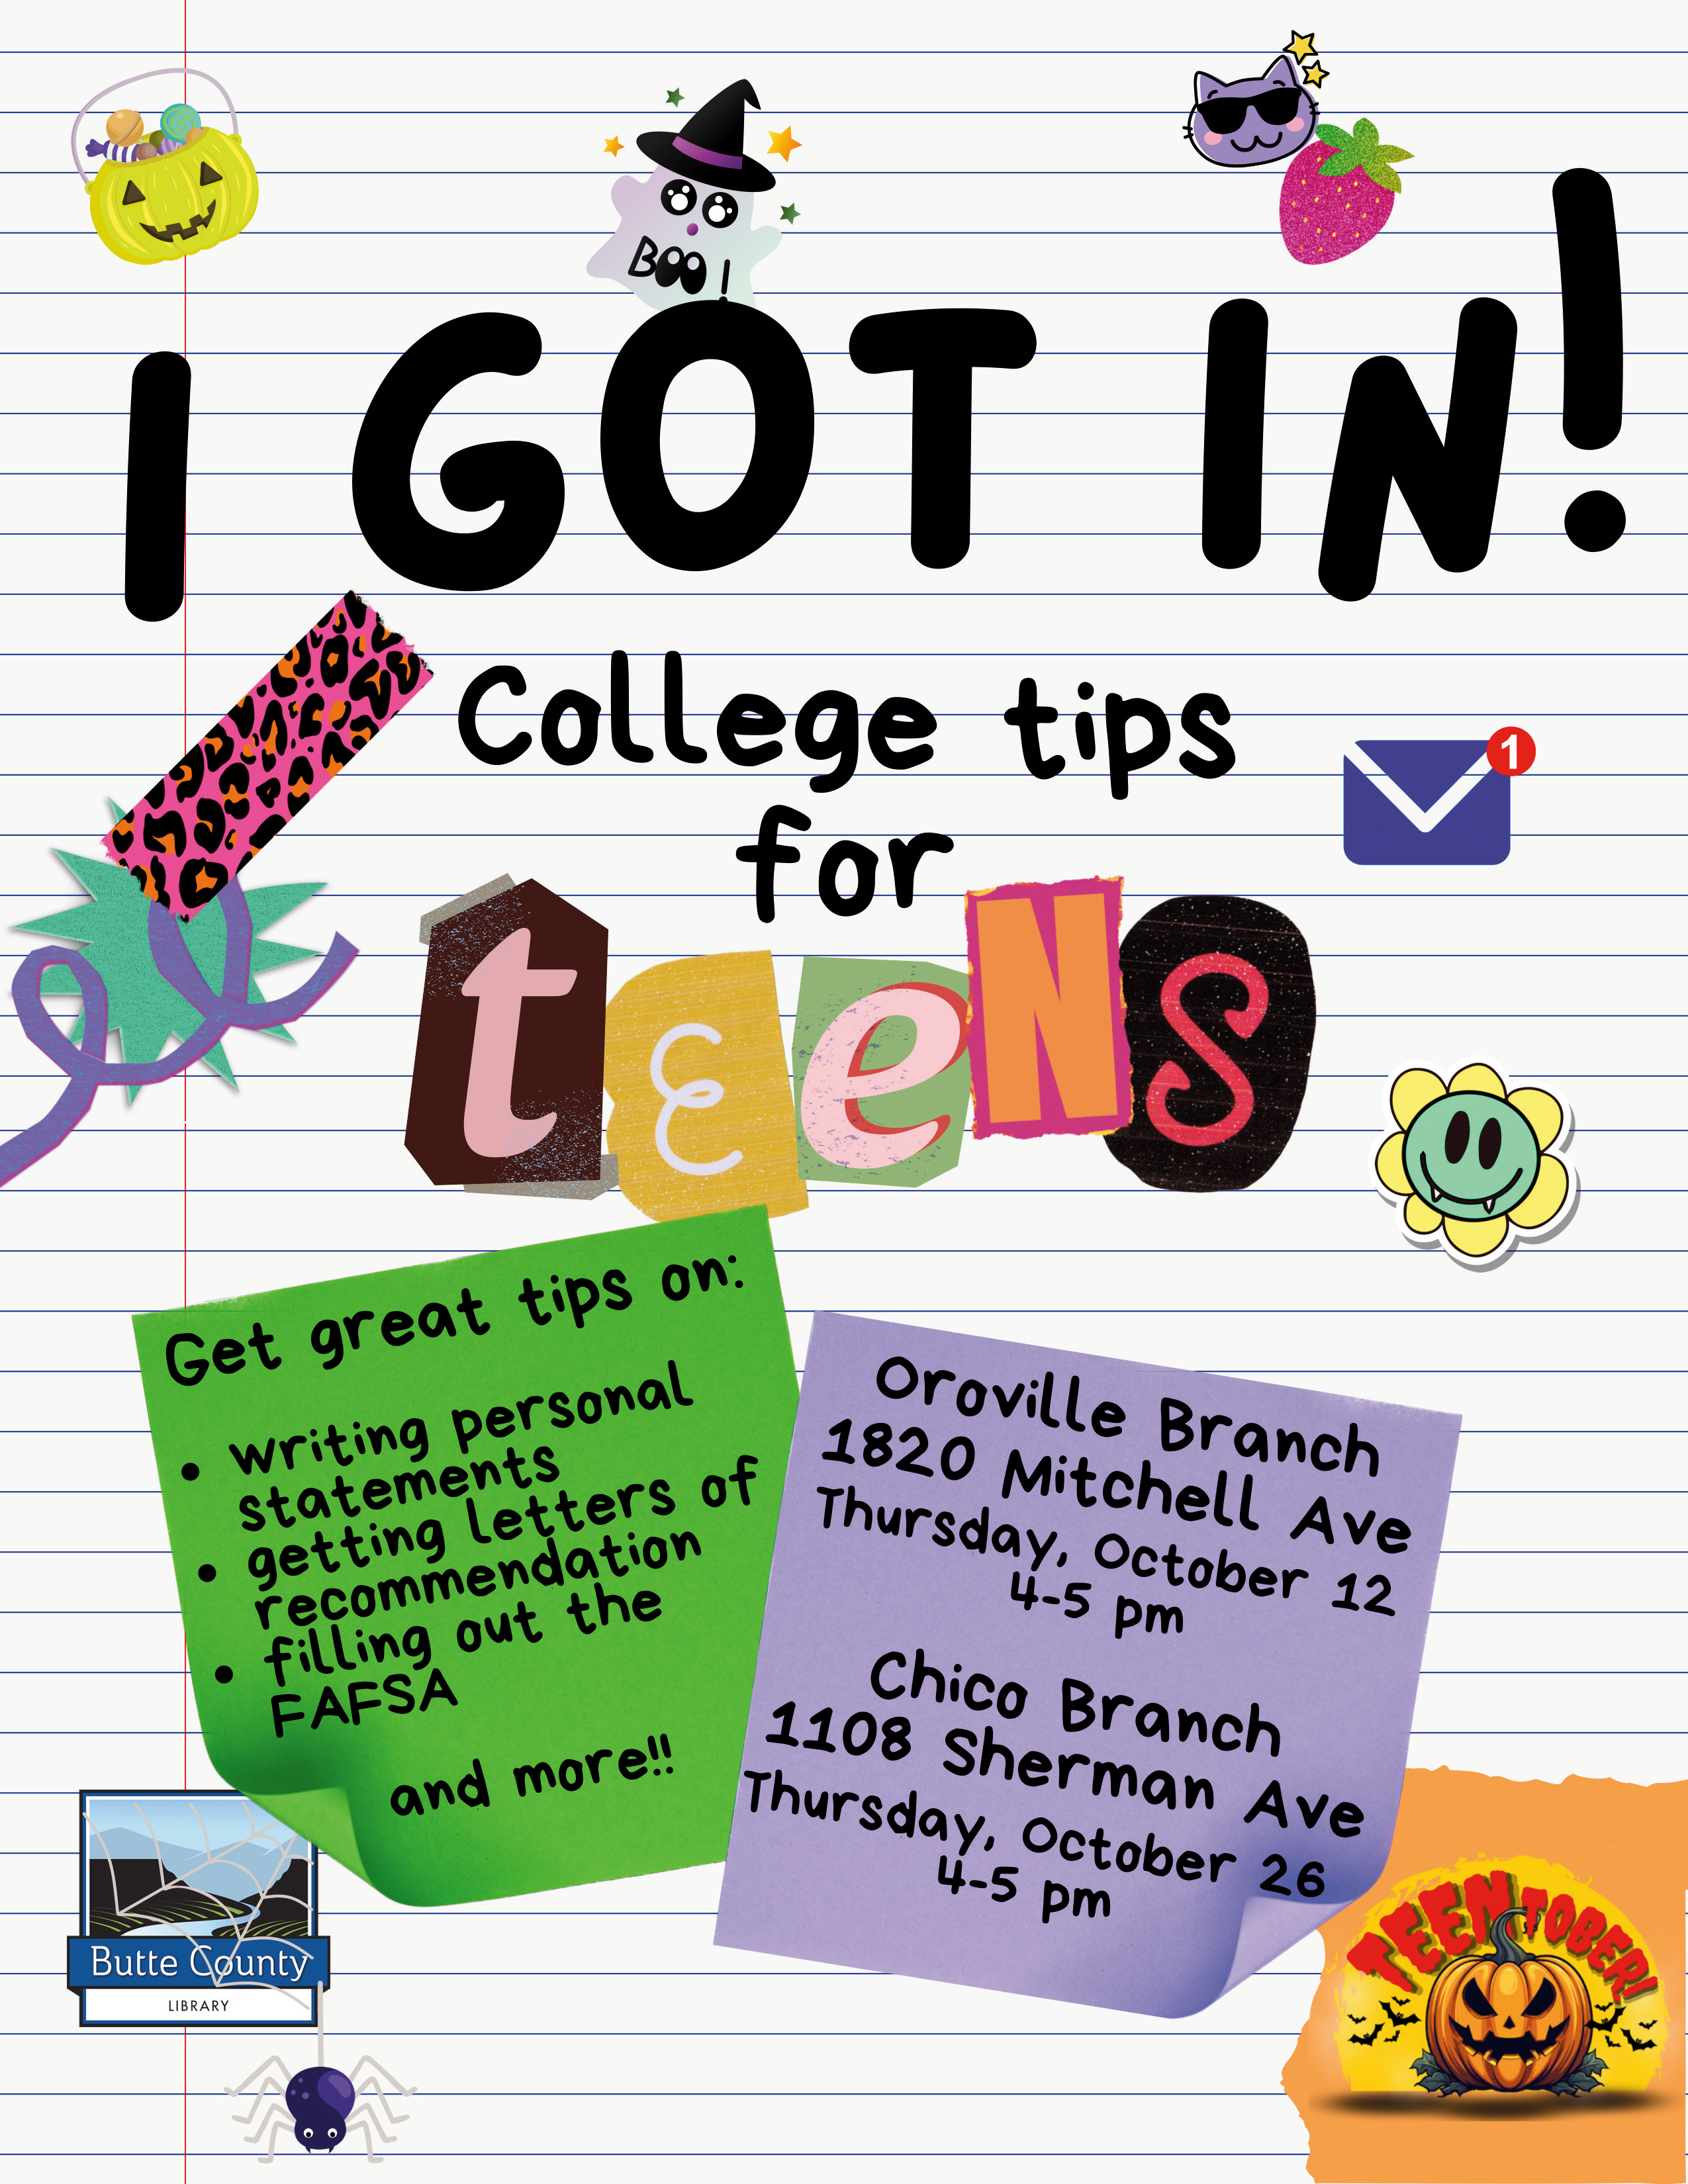 Picture of a college admissions flyer